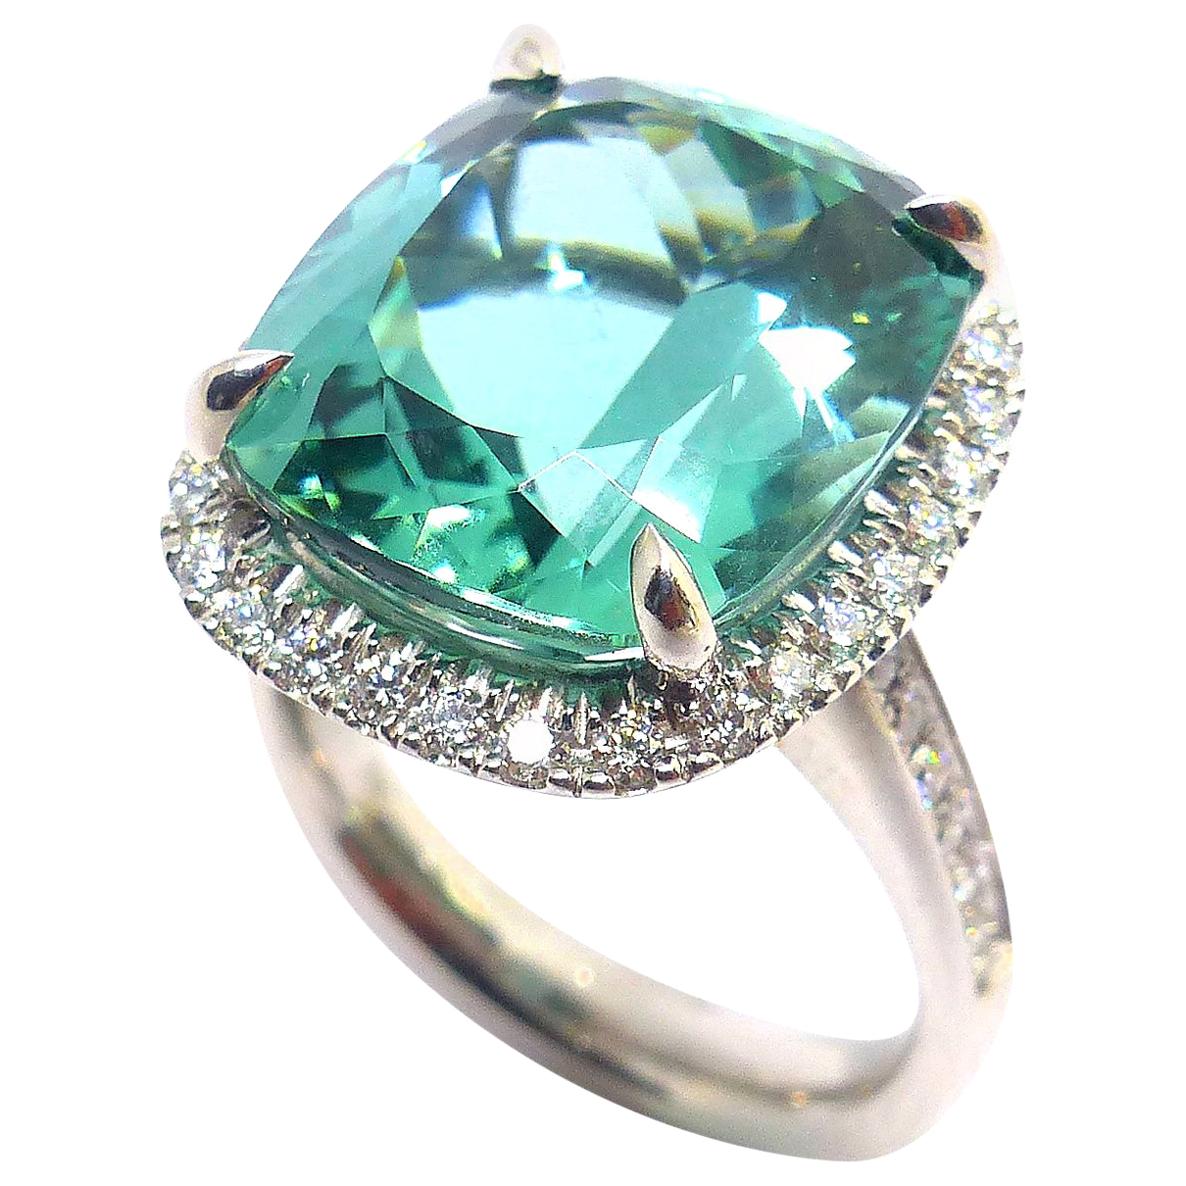 Ring in White Gold with 1 Tourmaline Cushion Shape and Diamonds. 